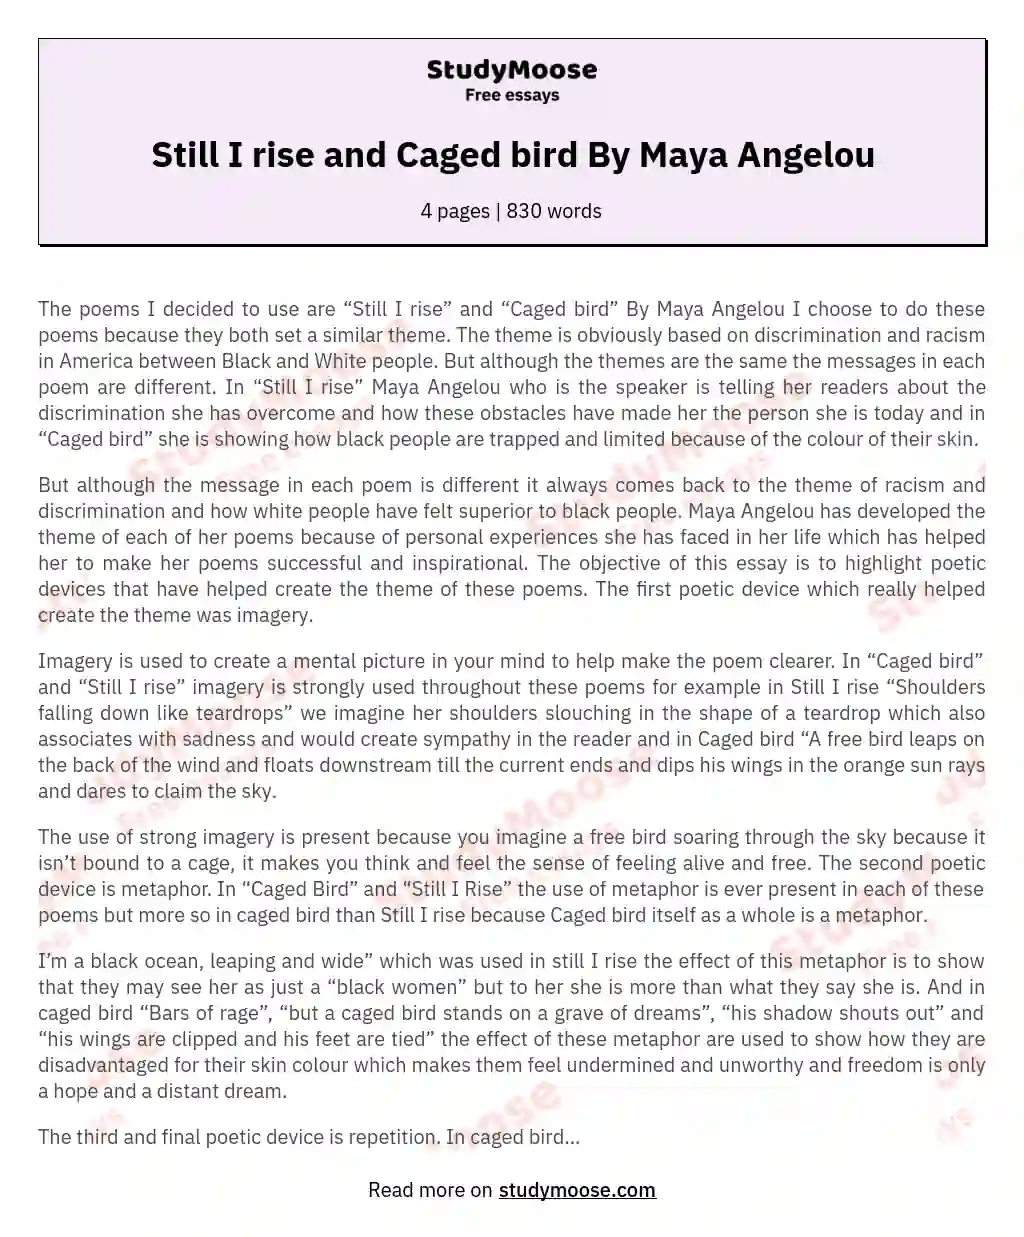 Still I rise and Caged bird By Maya Angelou essay